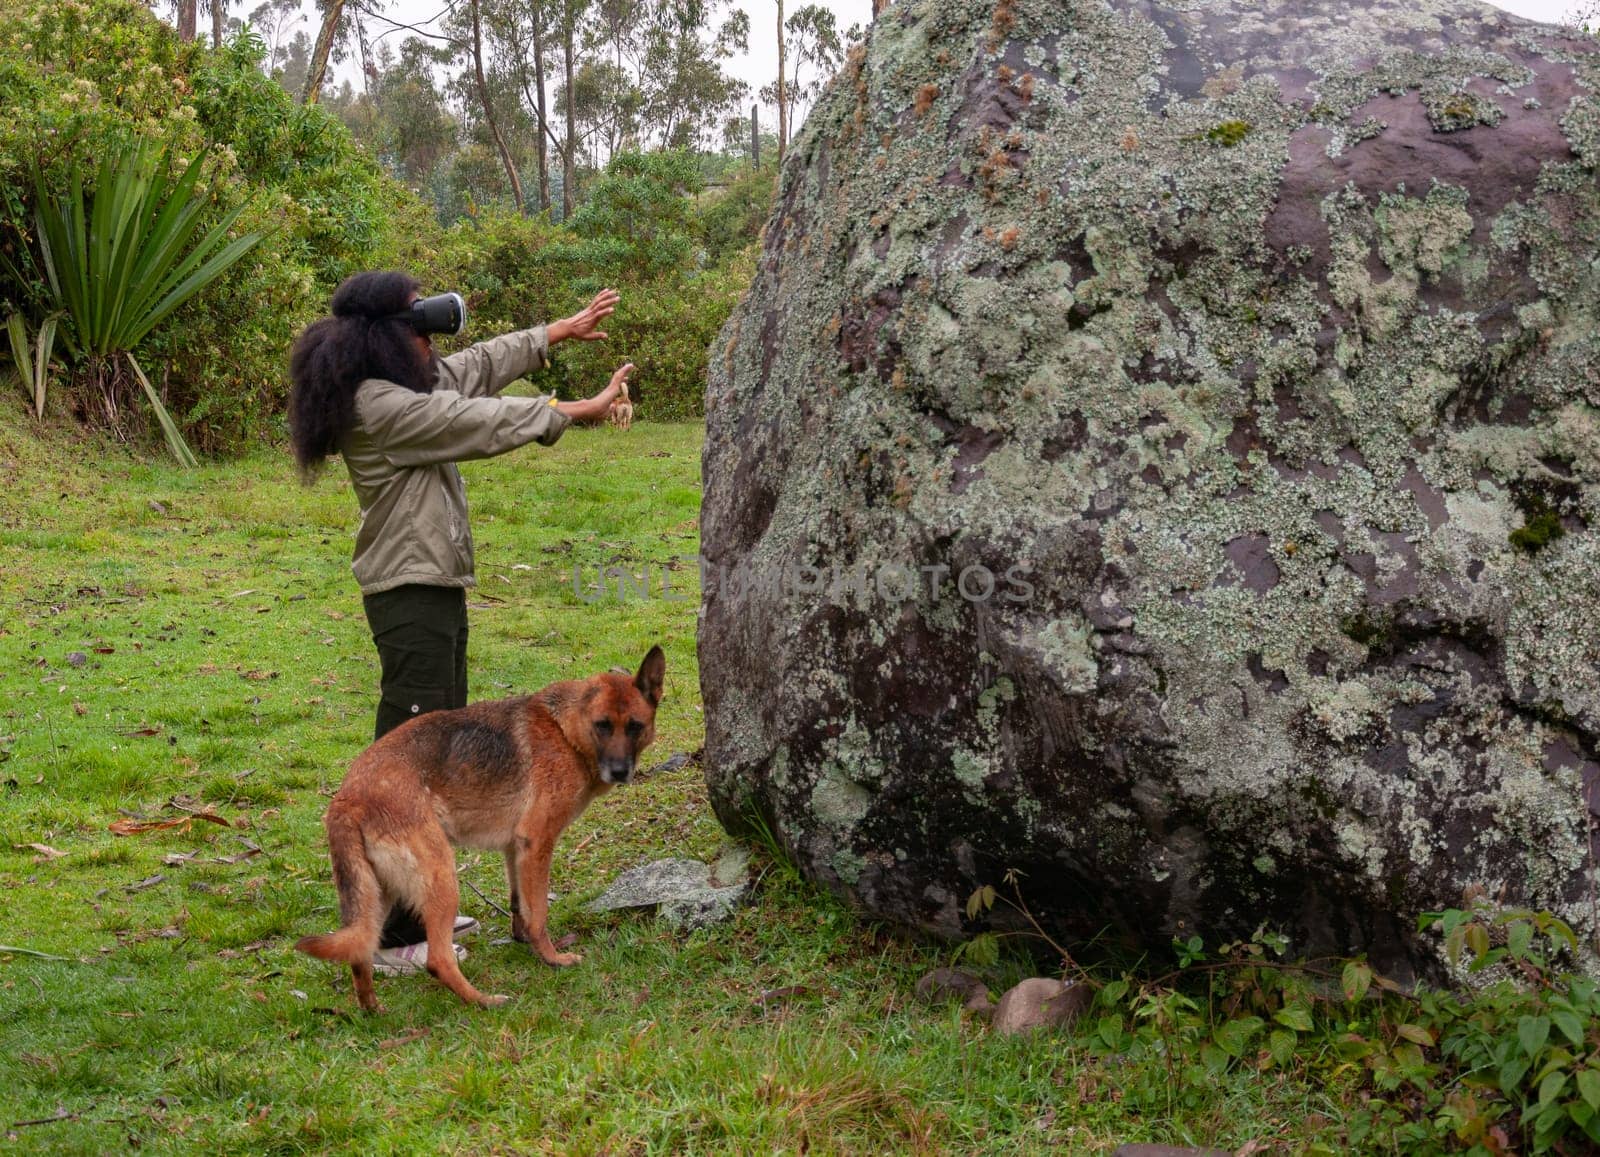 afro girl with augmented reality glasses getting information about a prehistoric stone thanks to advanced technology together with her earless dog. by Raulmartin